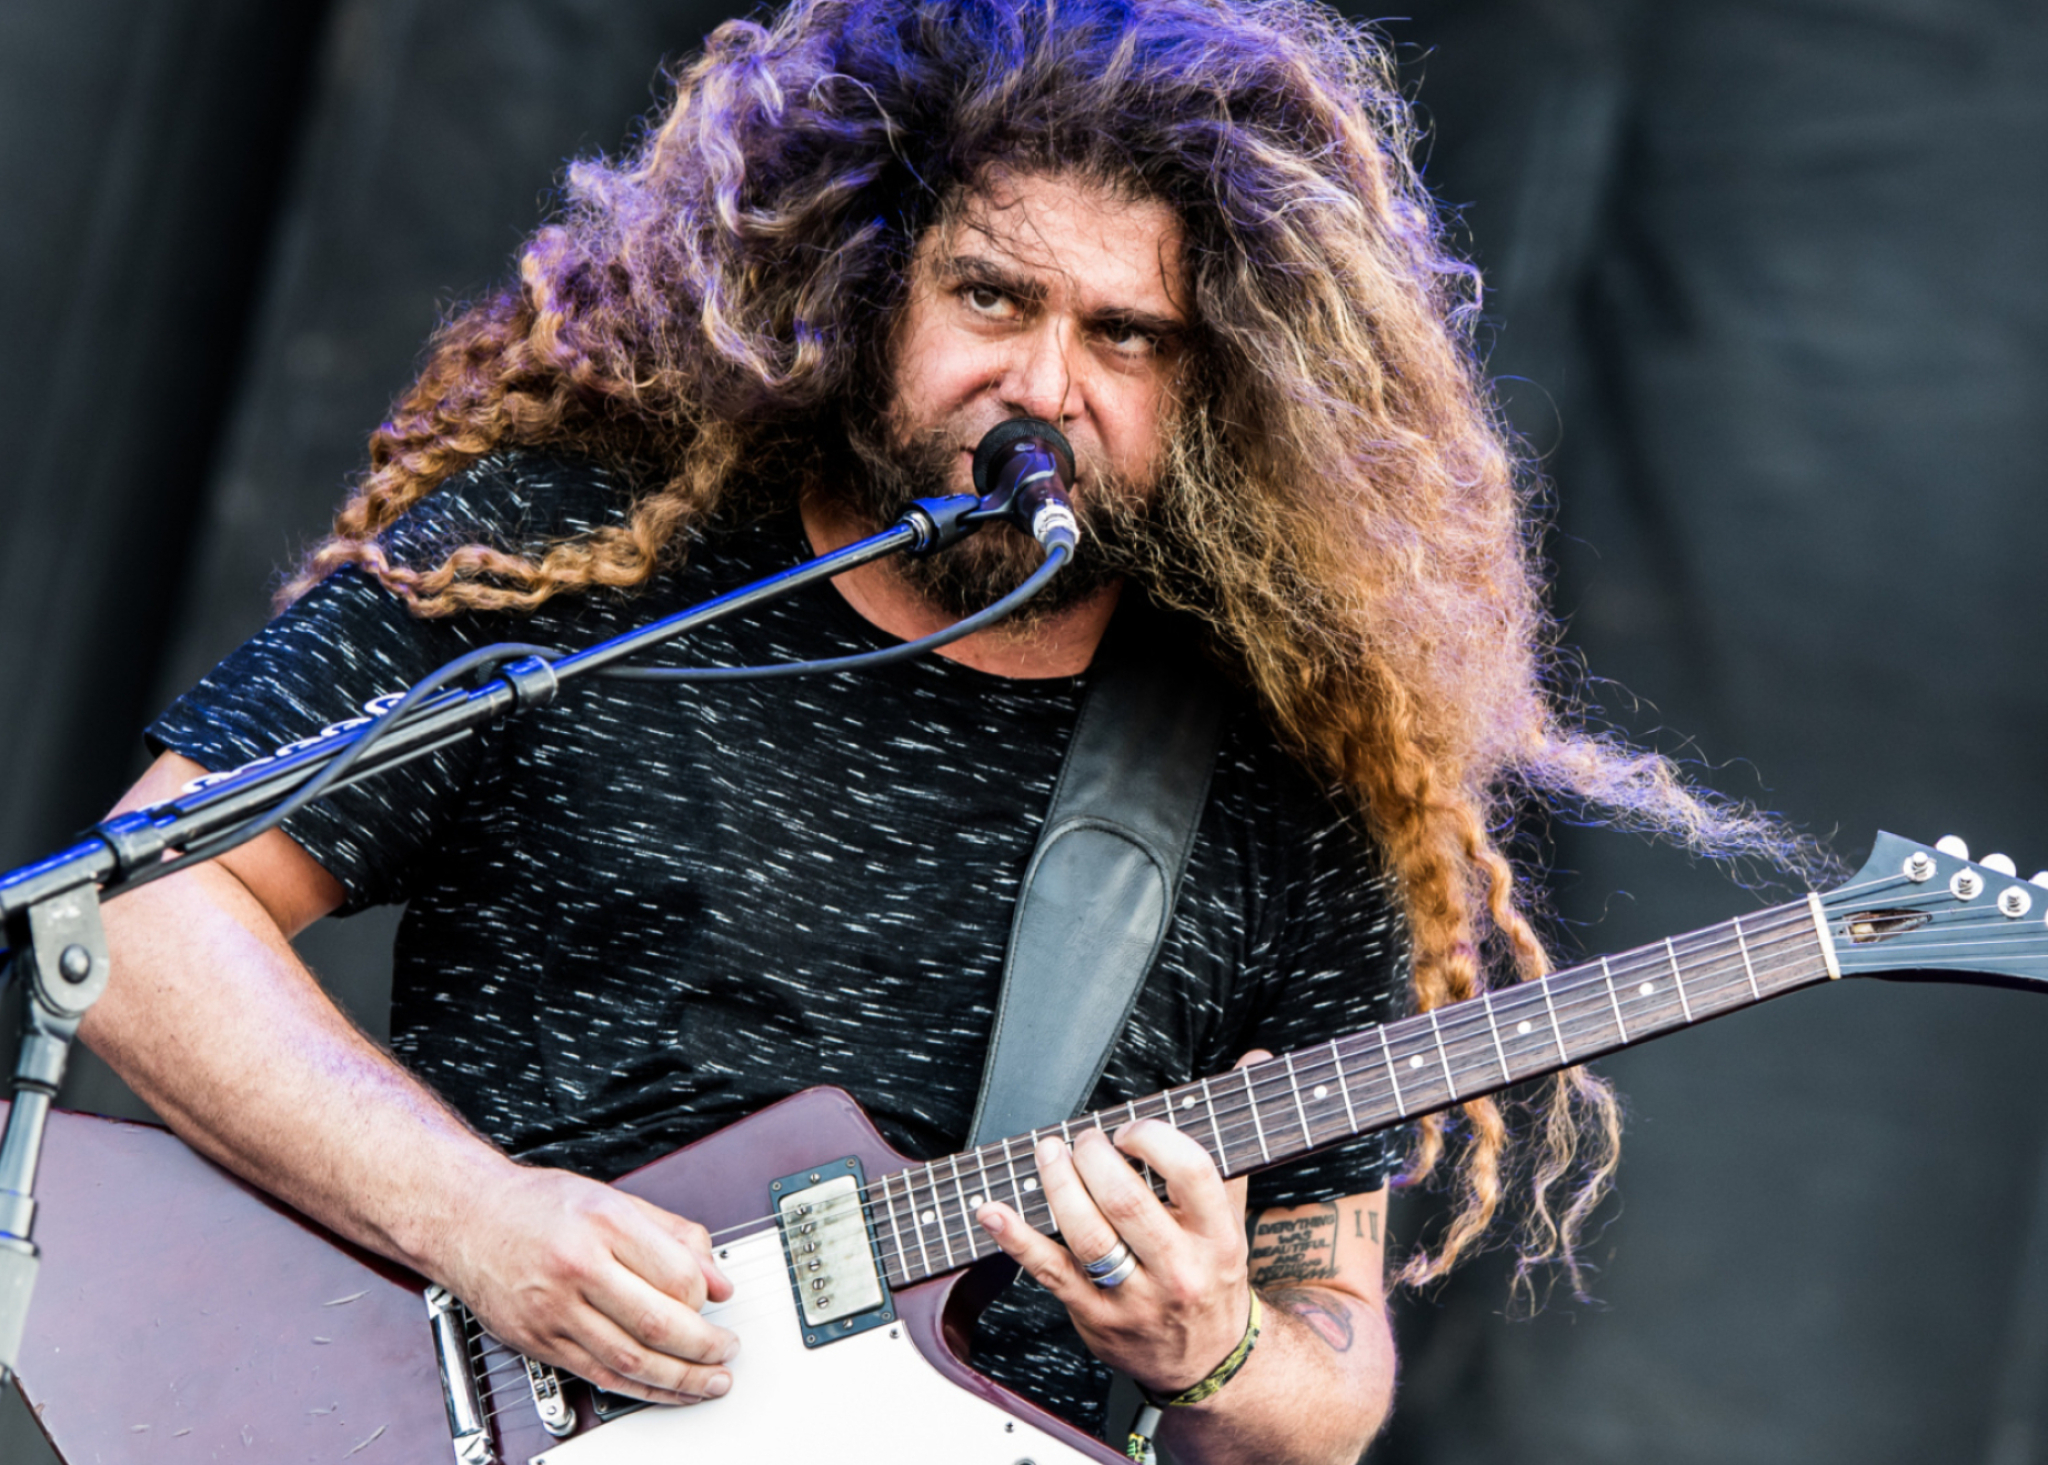 Coheed and Cambria, Rock concert, Coheed and Cambria live, Coheed and Cambria music, 2050x1470 HD Desktop